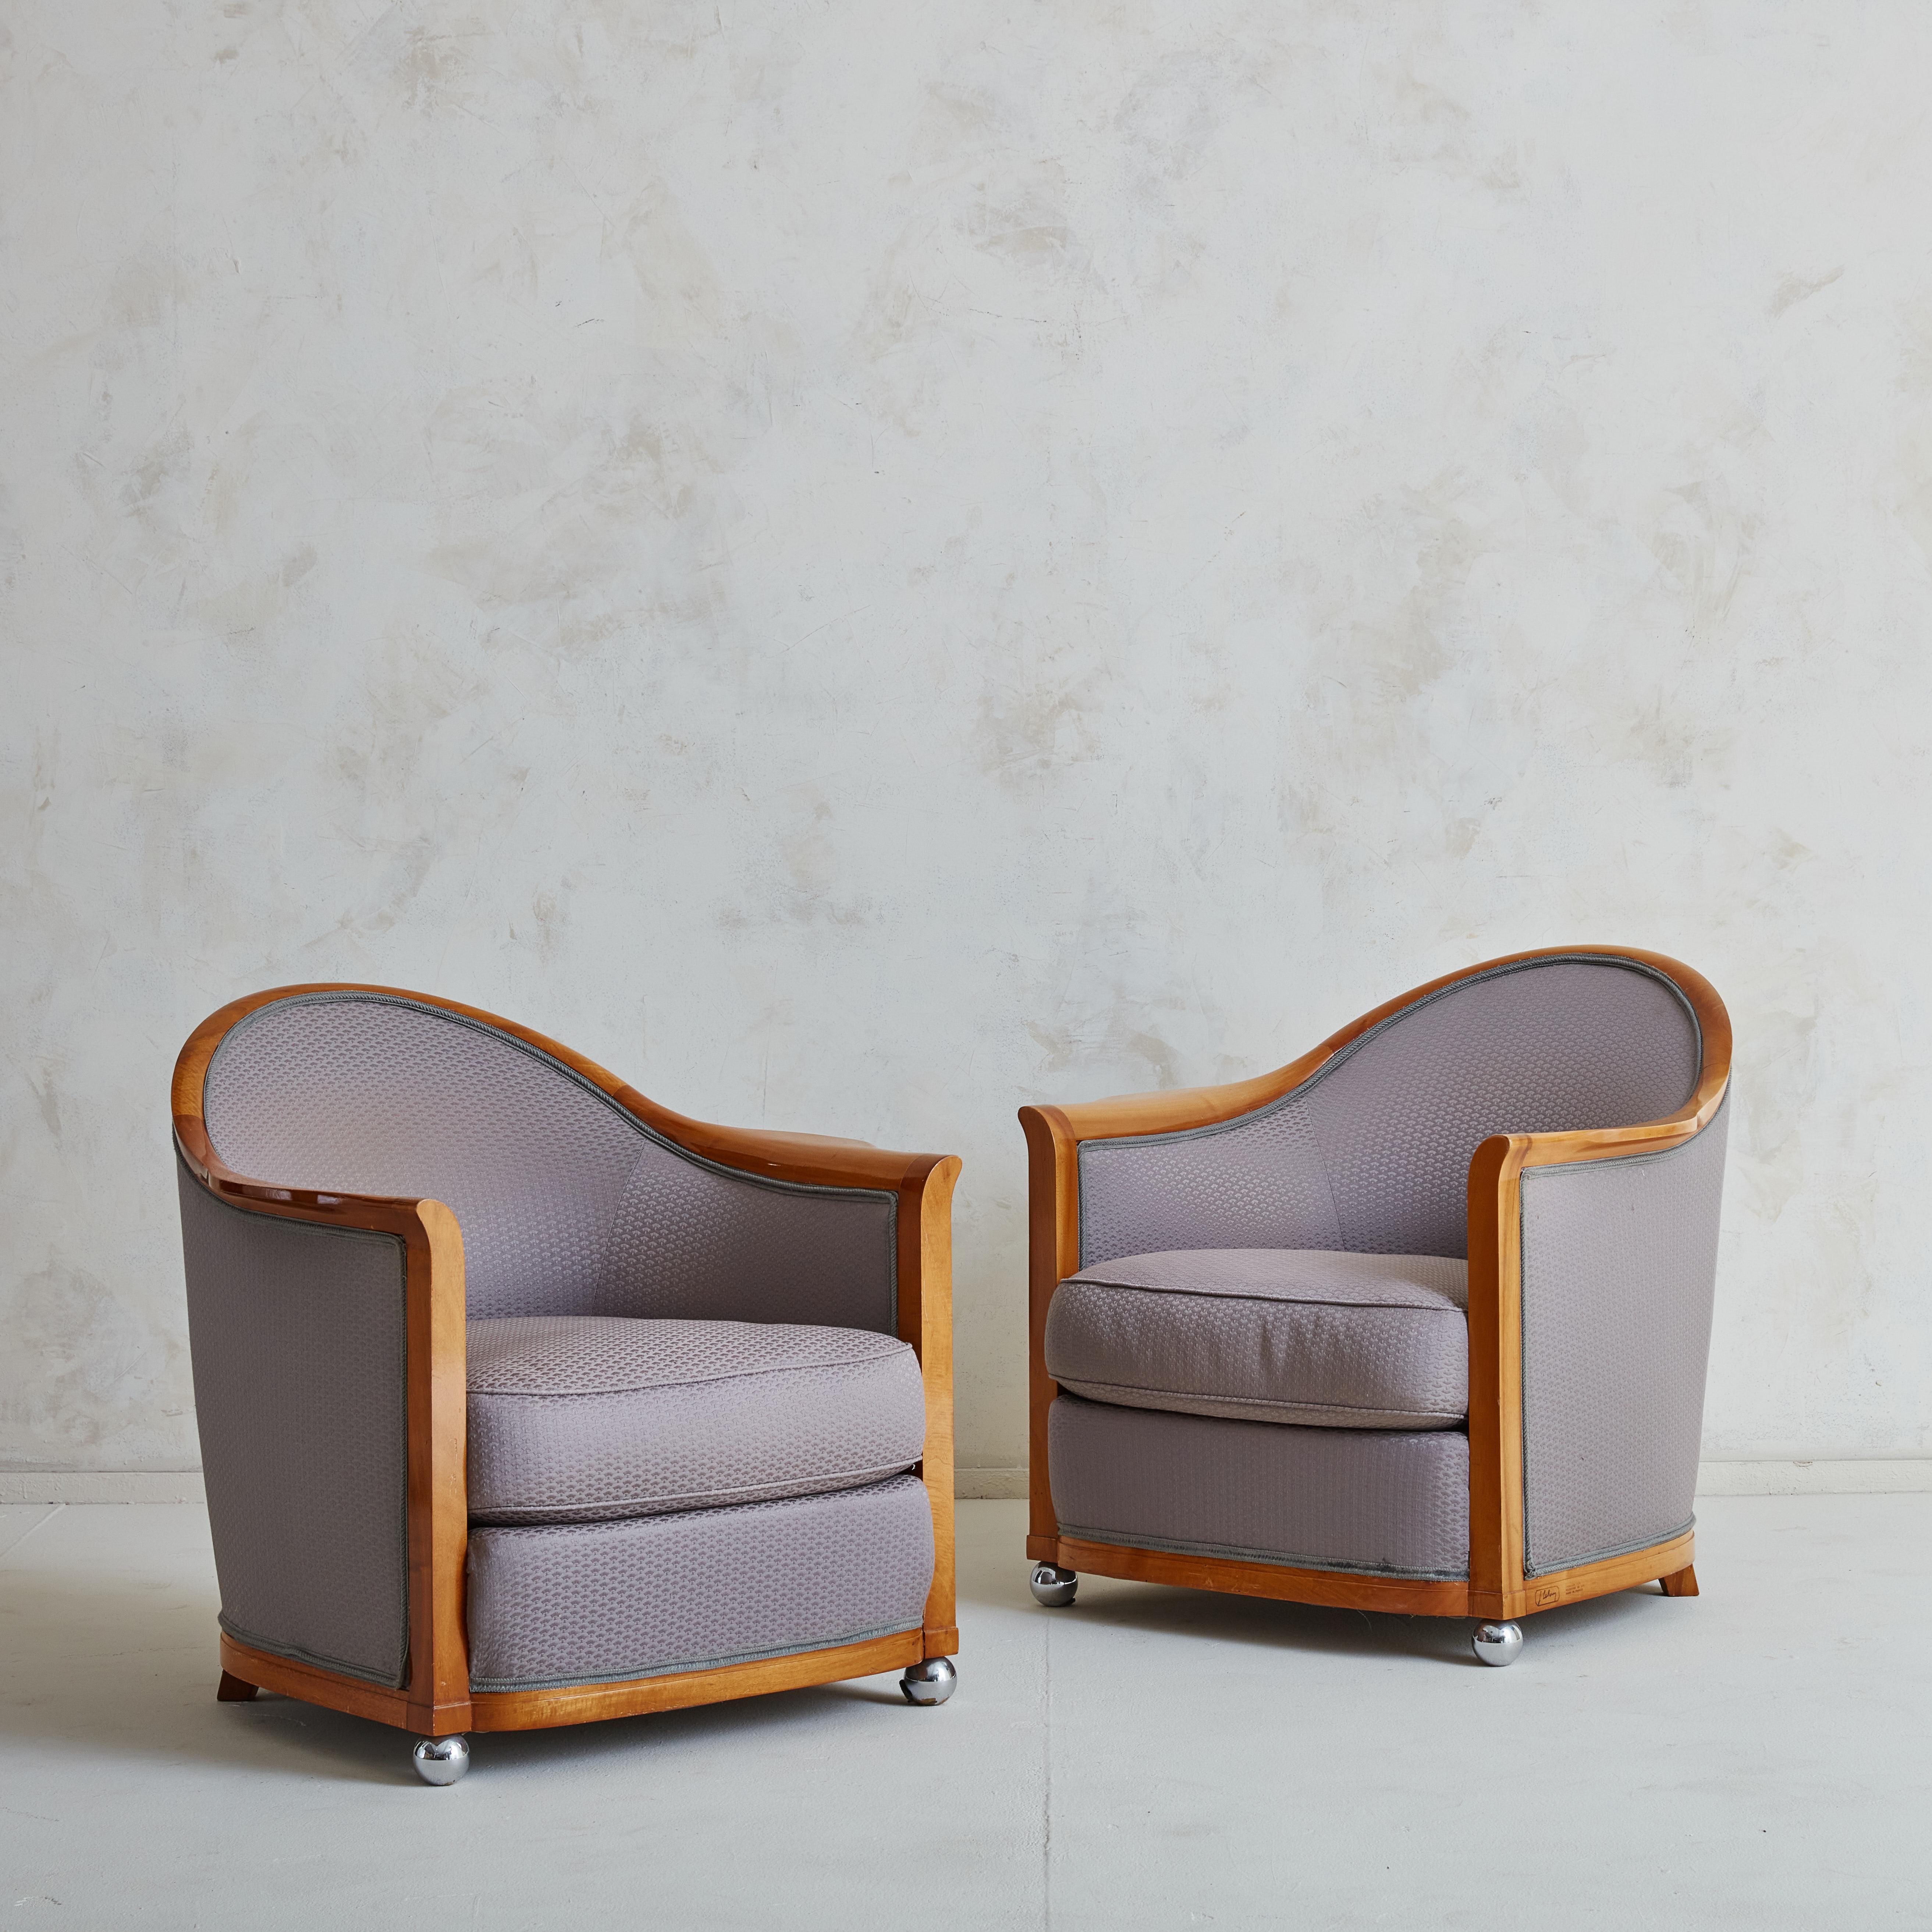 Beautiful pair of art déco armchairs Designed by Jules Leleu in 1929,  and re-issued in 1986 for La Mamounia hotel Marrakesh which was commissioned by Jacques Garcia. 
This beautiful pair of armchairs have been produced in a stunning light wood